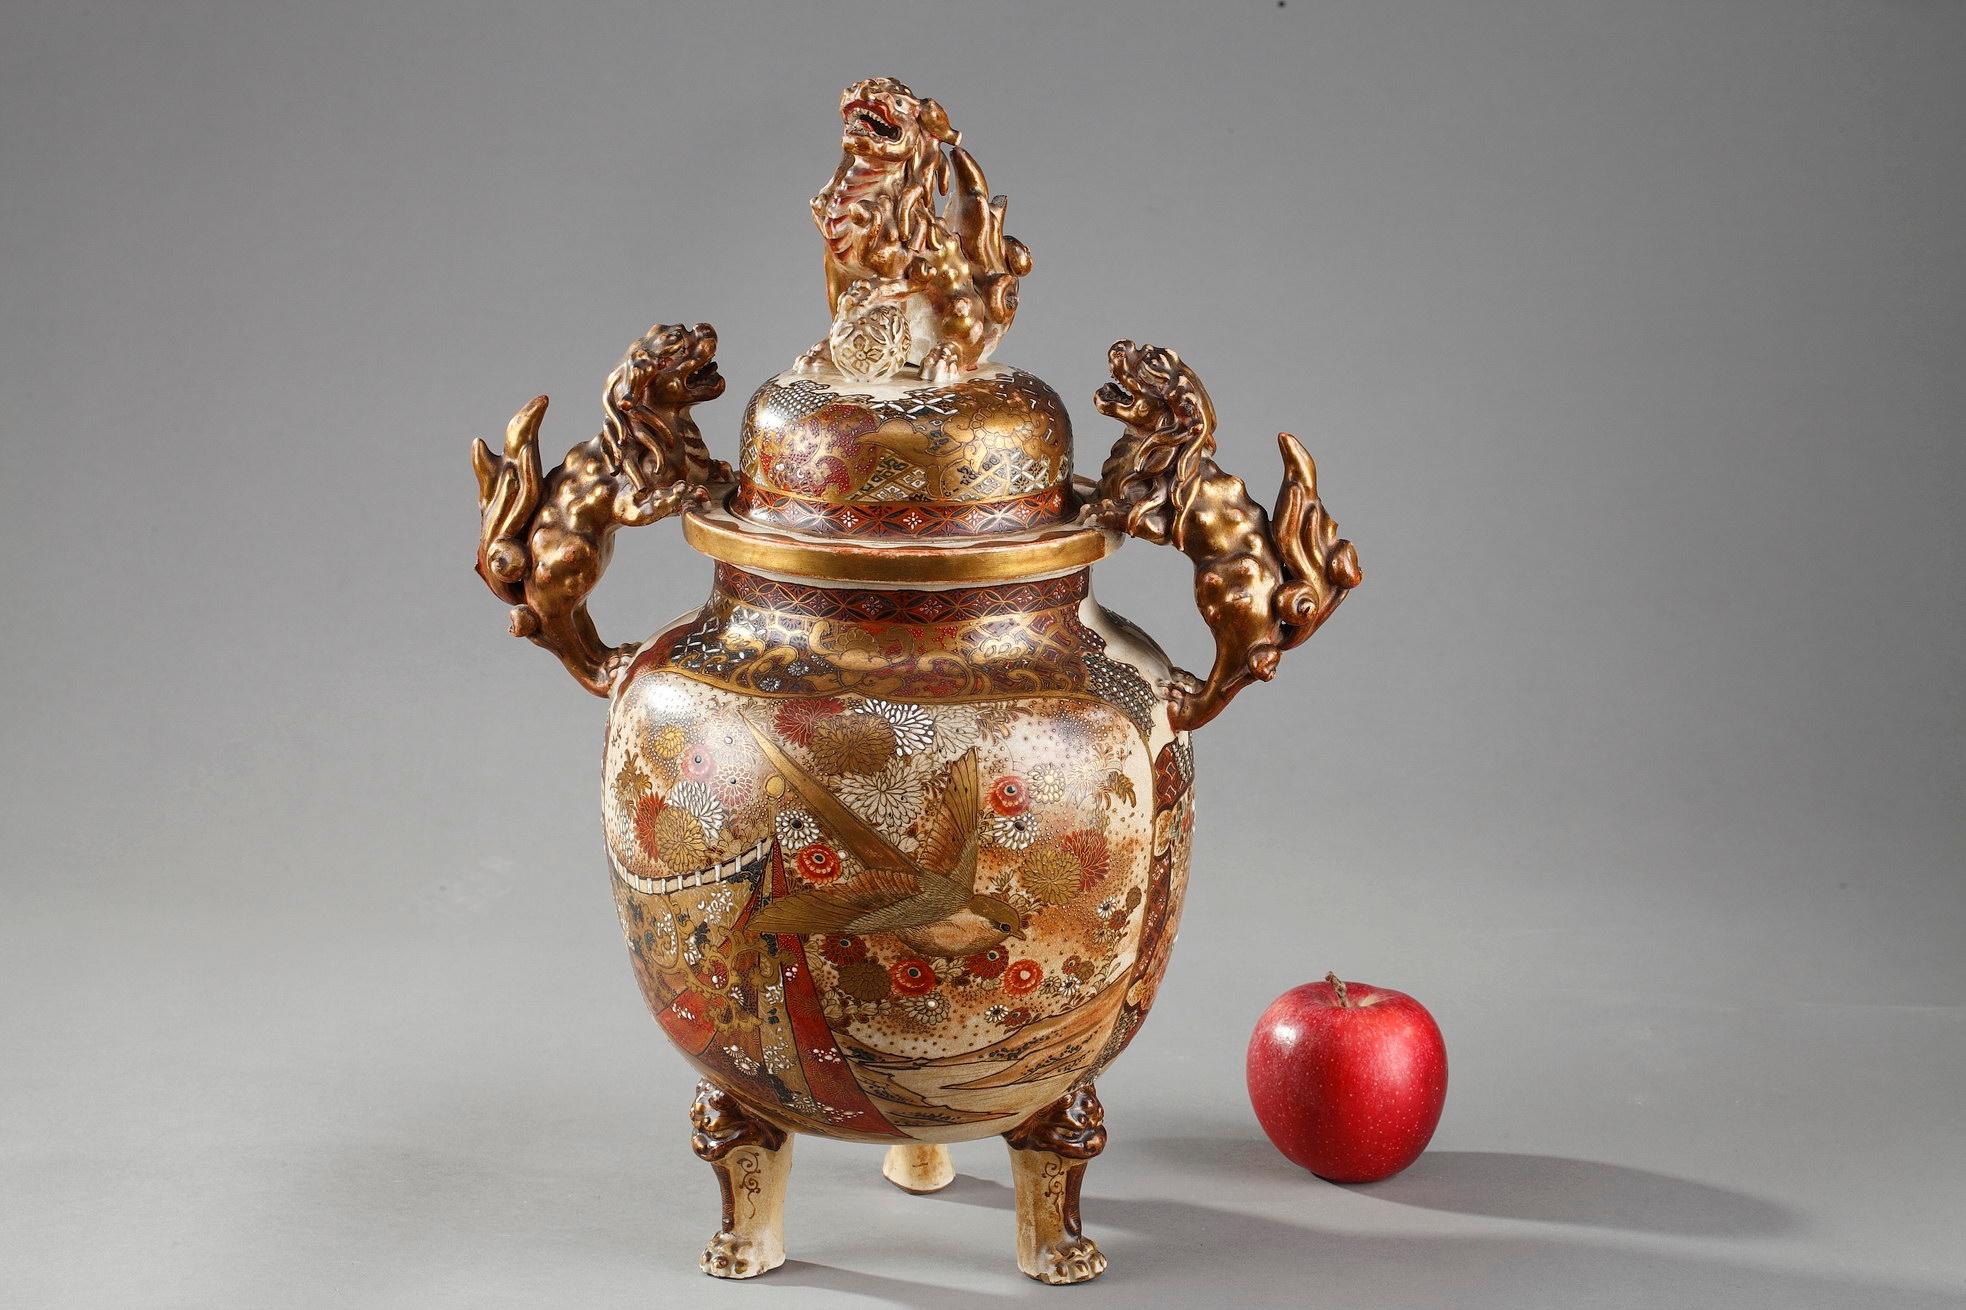 Tripod Satsuma perfume-burner painted in polychrome enamels and gold. The paunch is decorated with Japanese courtiers, the reverse with birds in landscapes. The shoulder and lid are embellished with flowers and geometric patterns. The handles and